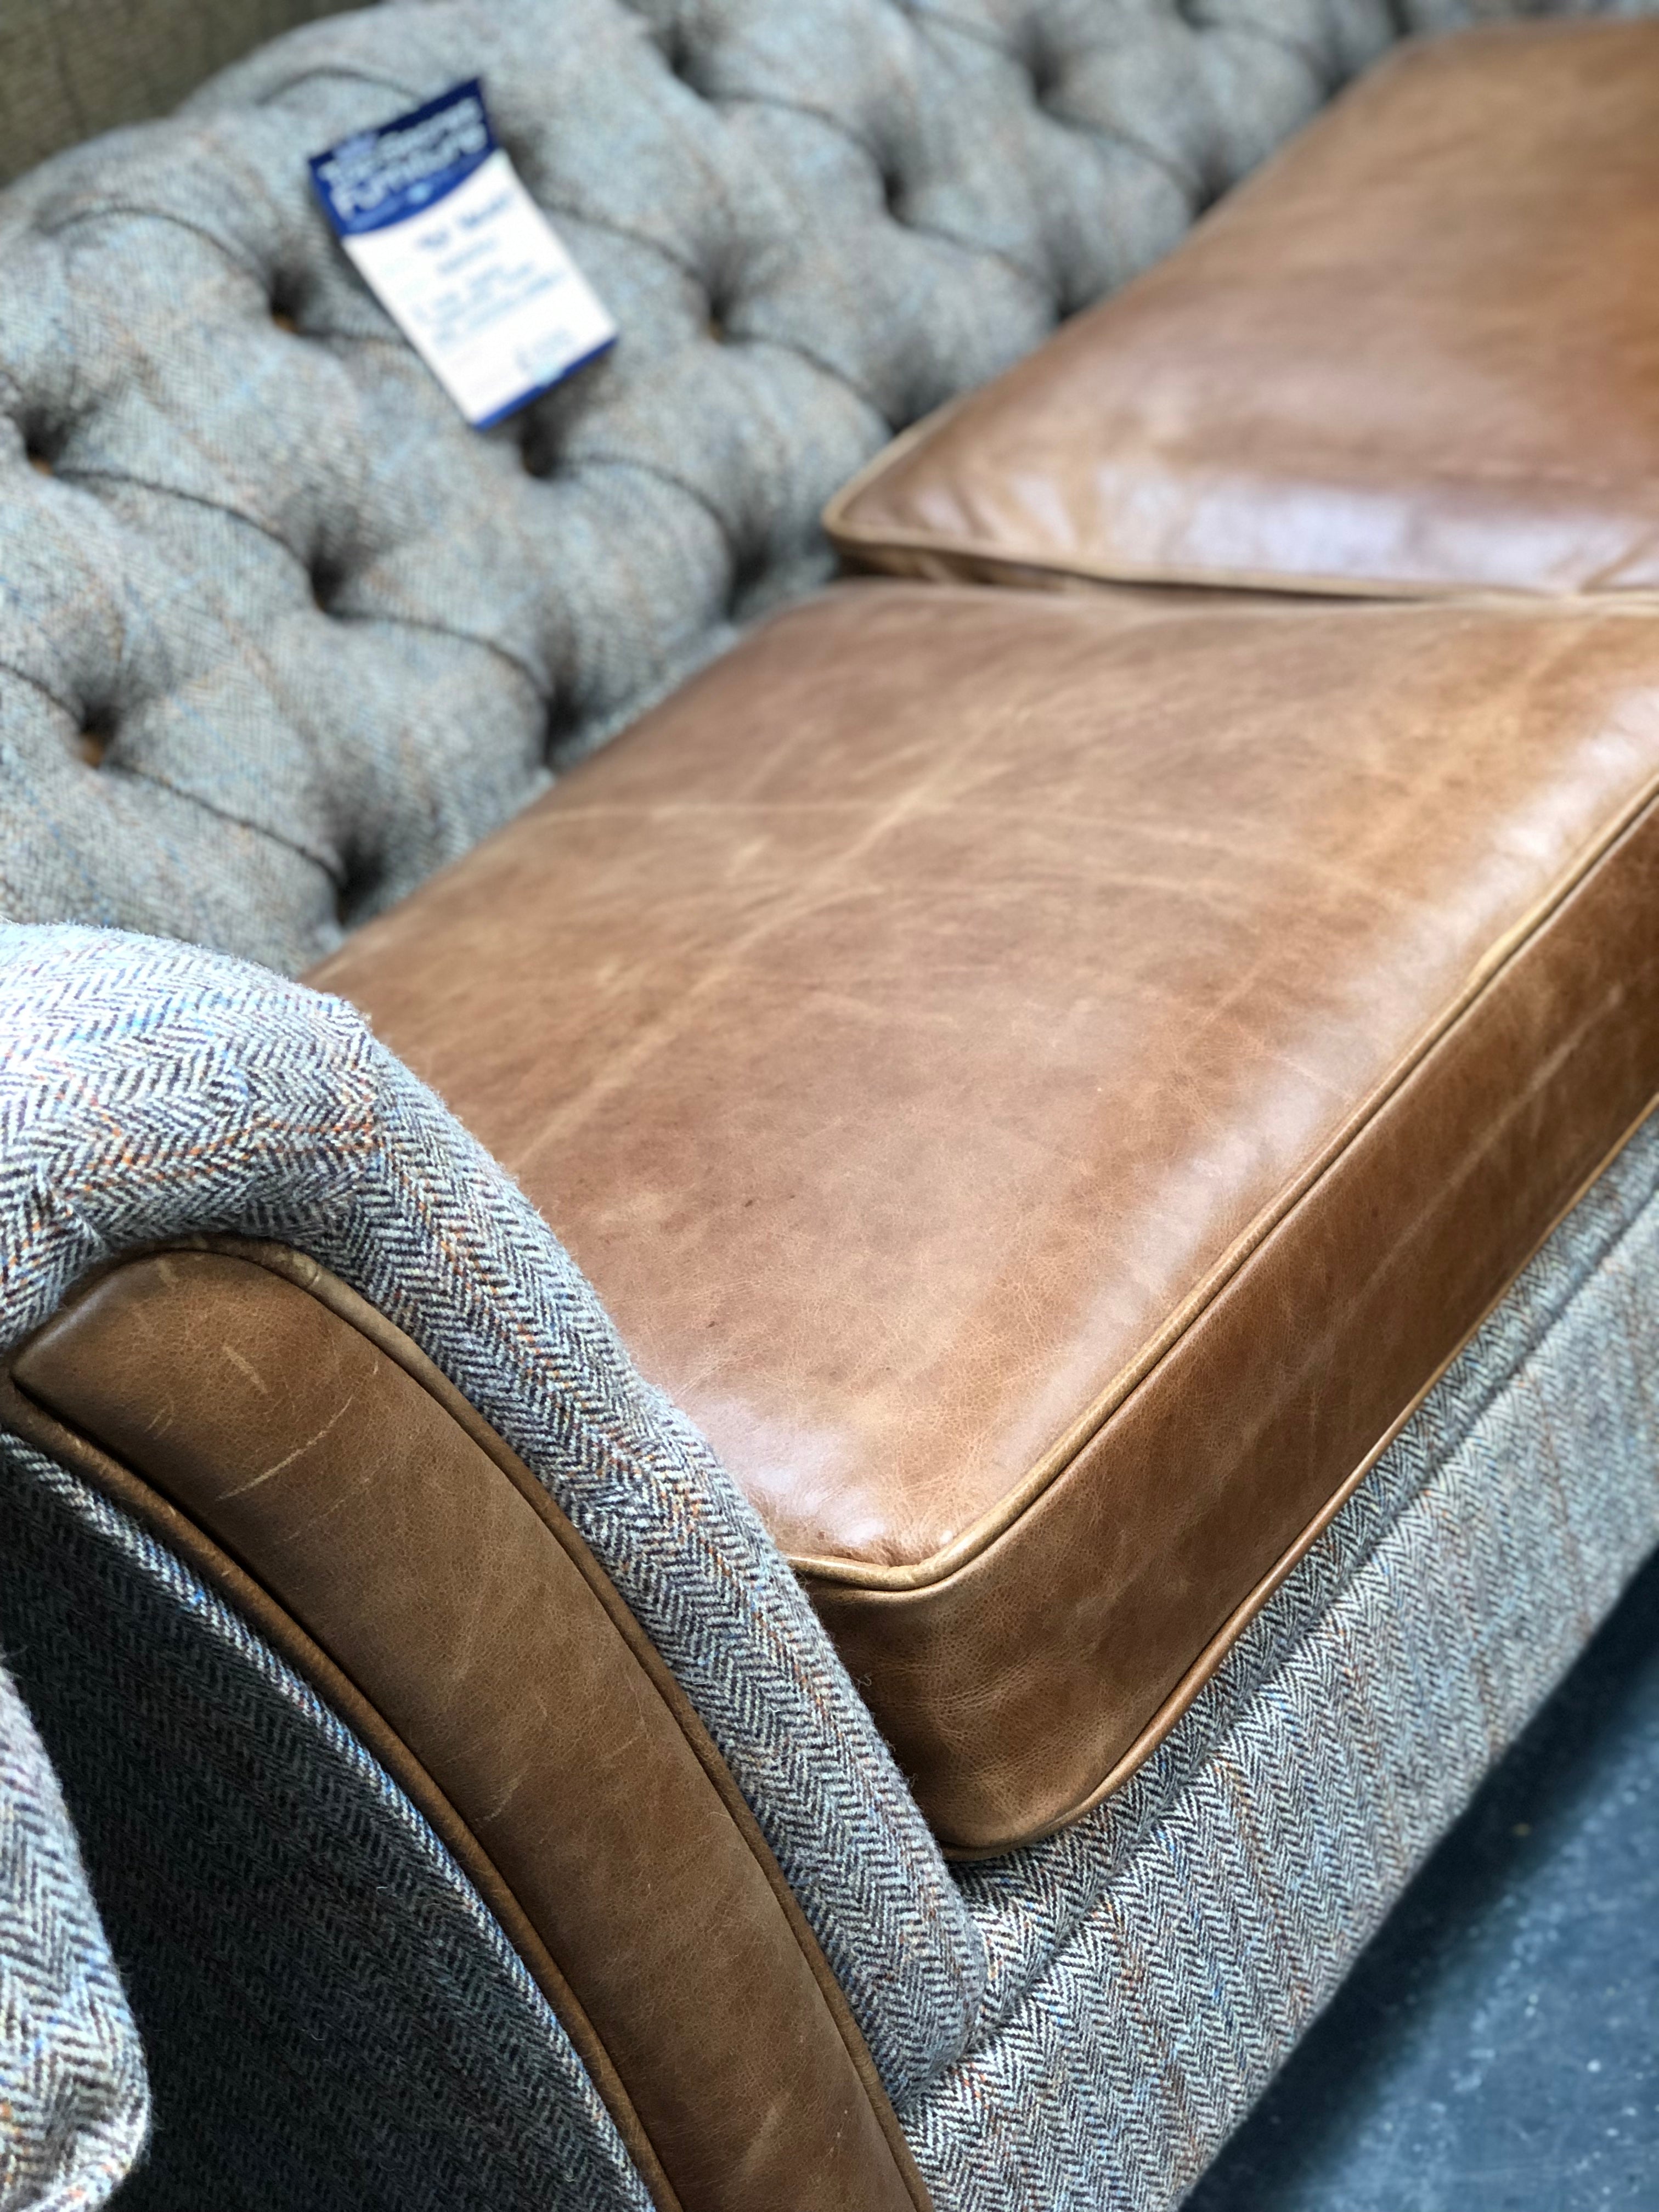 Granby 2 seater leather and harris tweed sofa